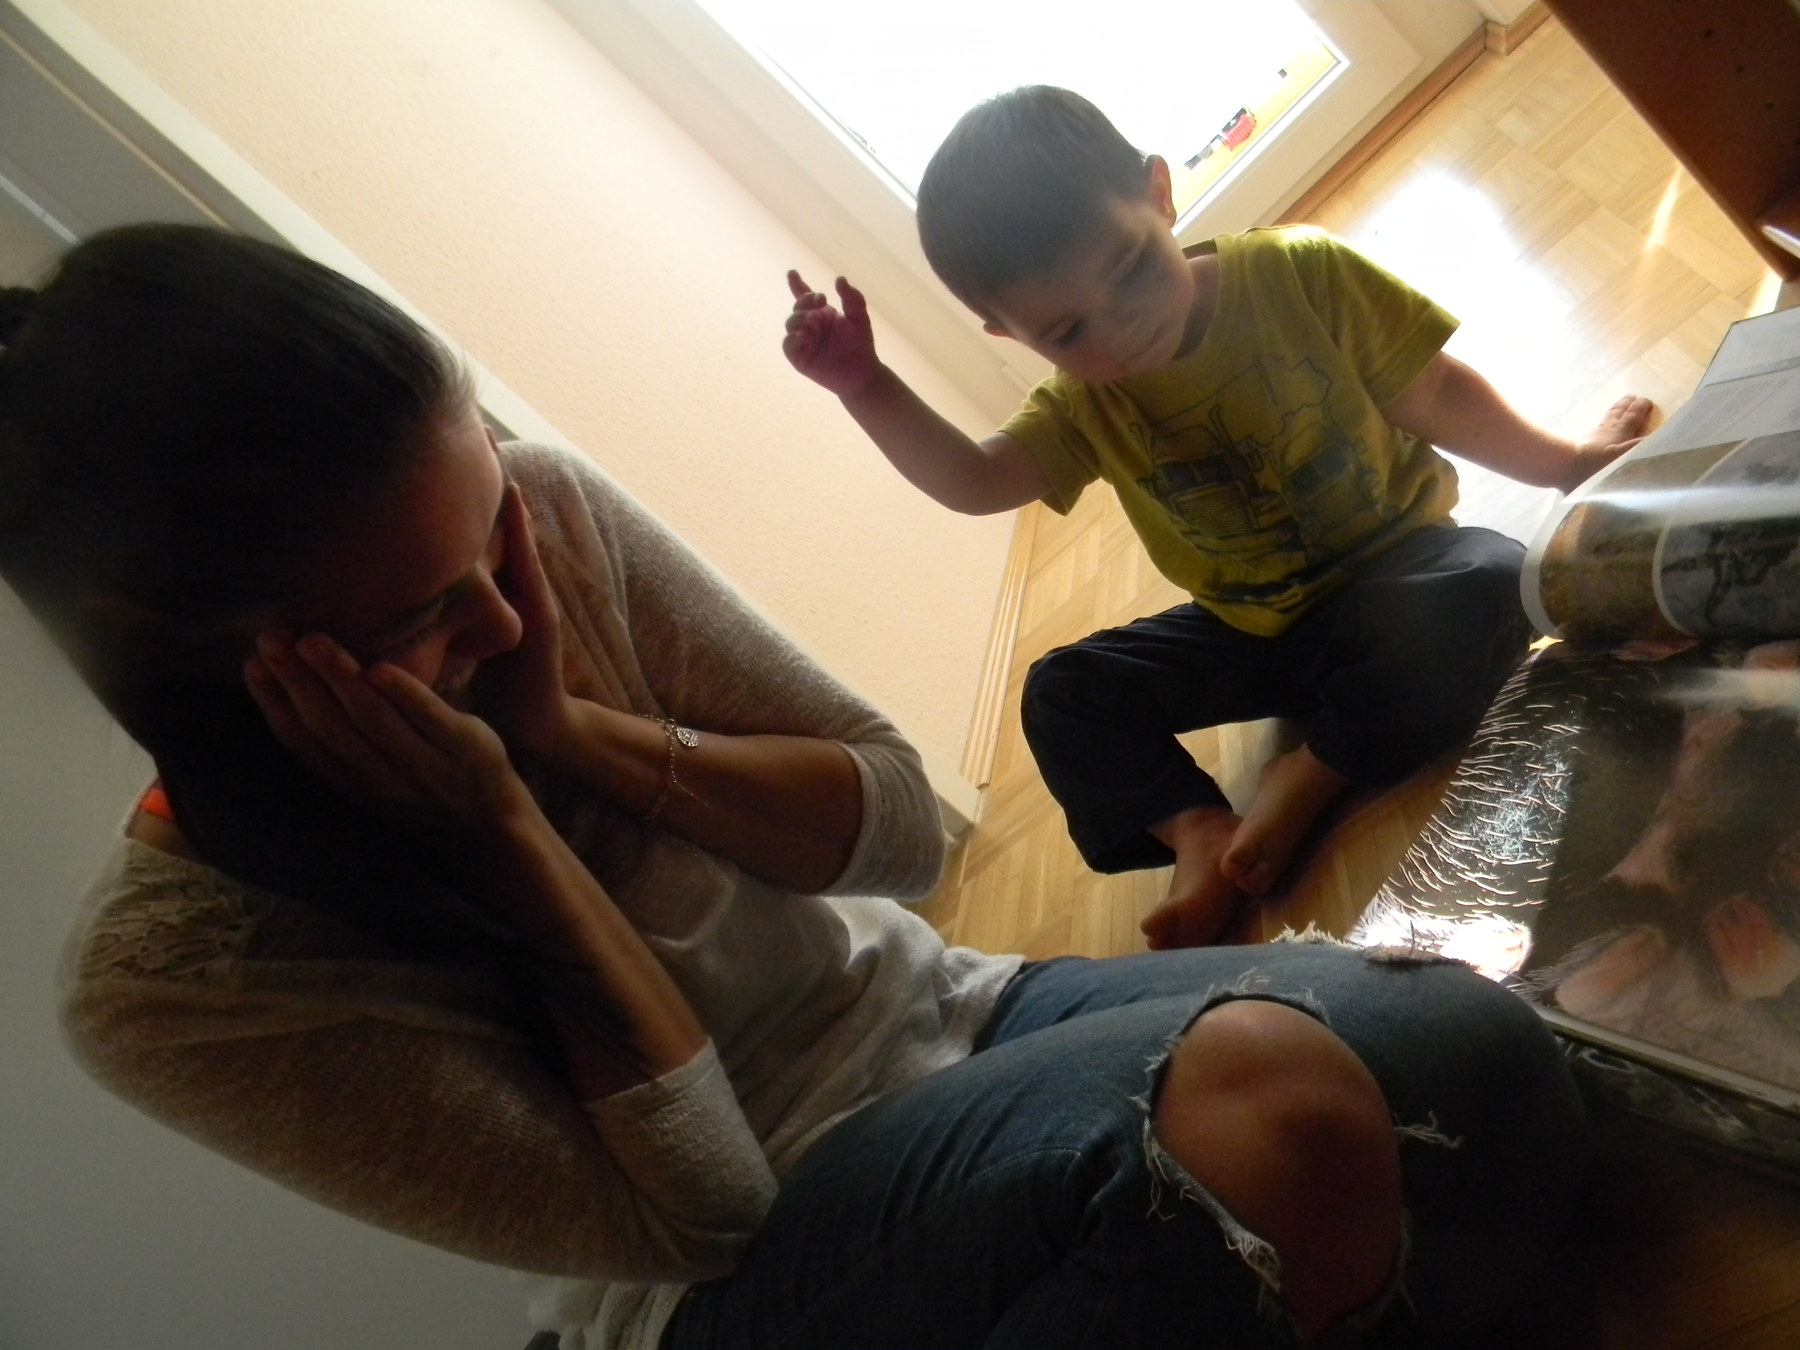 Judah showed Tante Sari all the enormous, nasty spiders in the book he found...